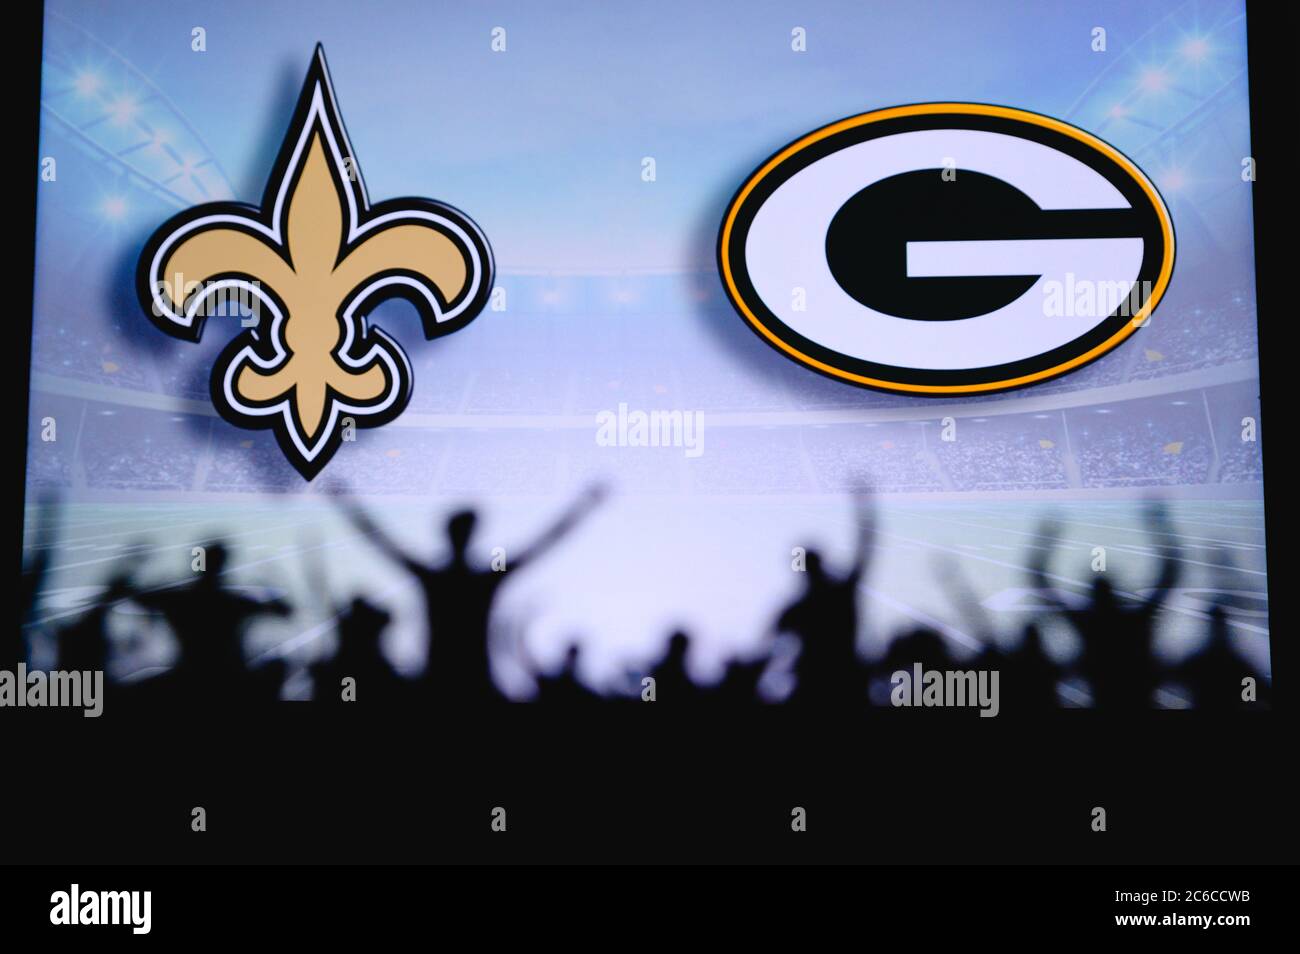 New Orleans Saints vs. Green Bay Packers. Fans support on NFL Game. Silhouette of supporters, big screen with two rivals in background. Stock Photo